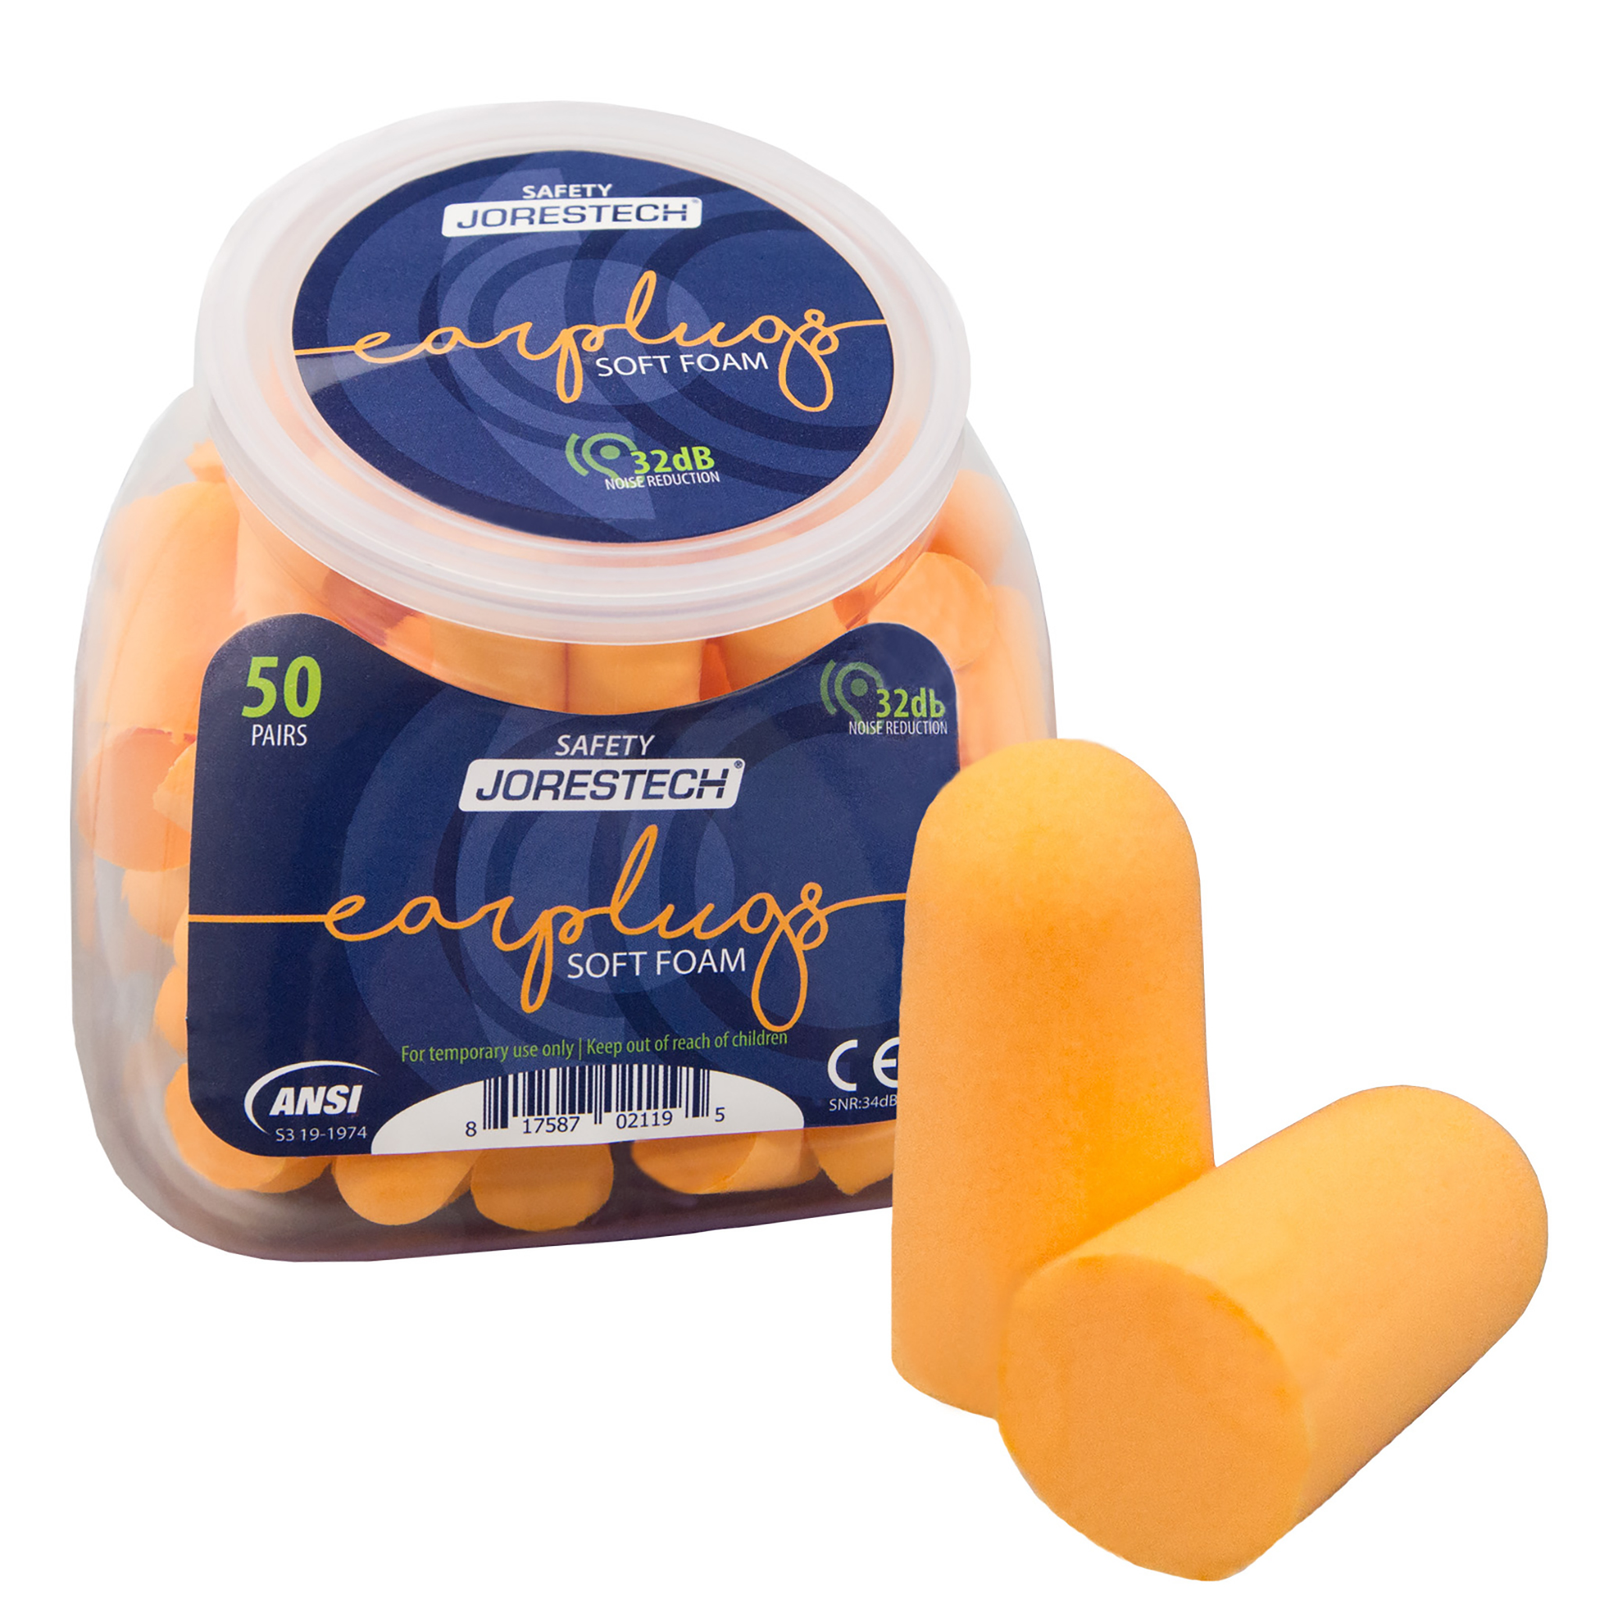 One transparent container filled with 50 pairs of orange JORESTECH ear plugs. 2 soft foam ear plugs are next to the container 